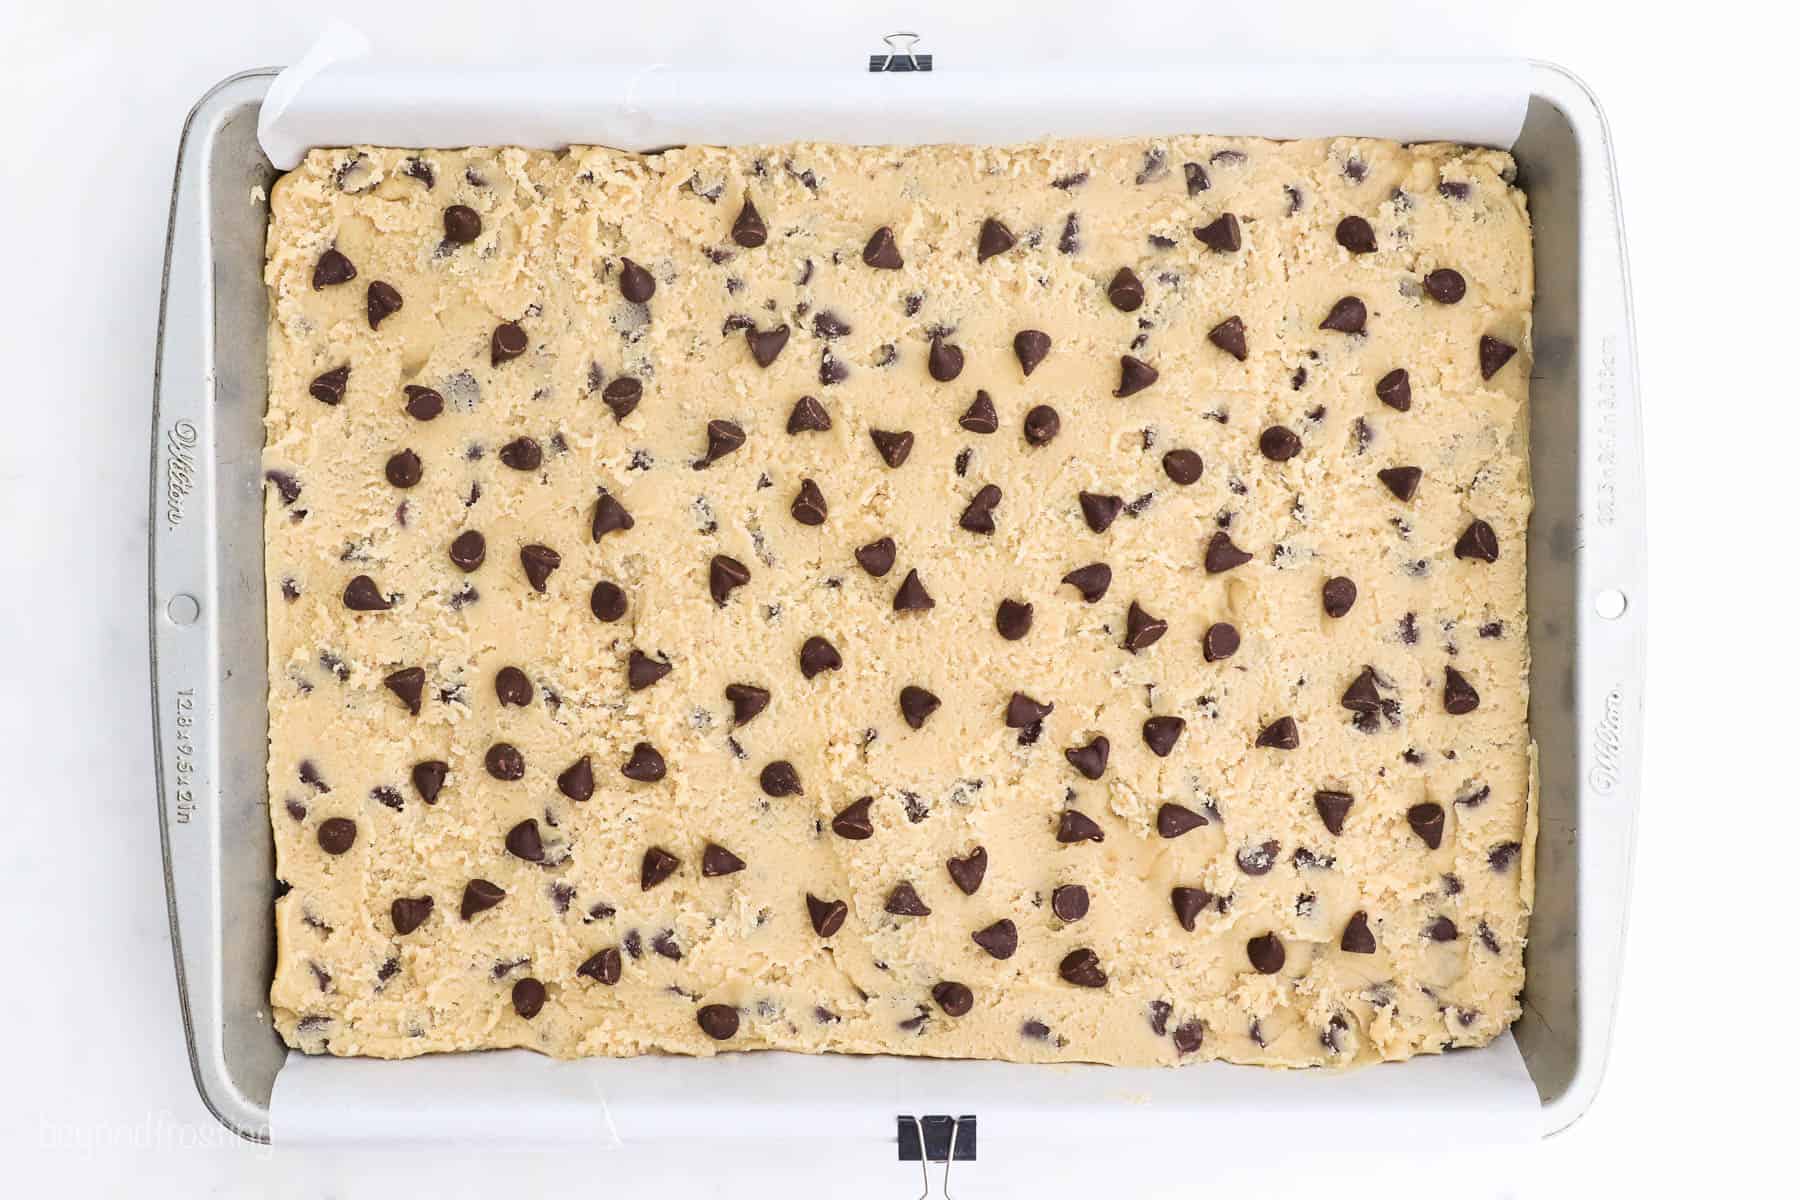 Cookie dough pressed into a baking pan